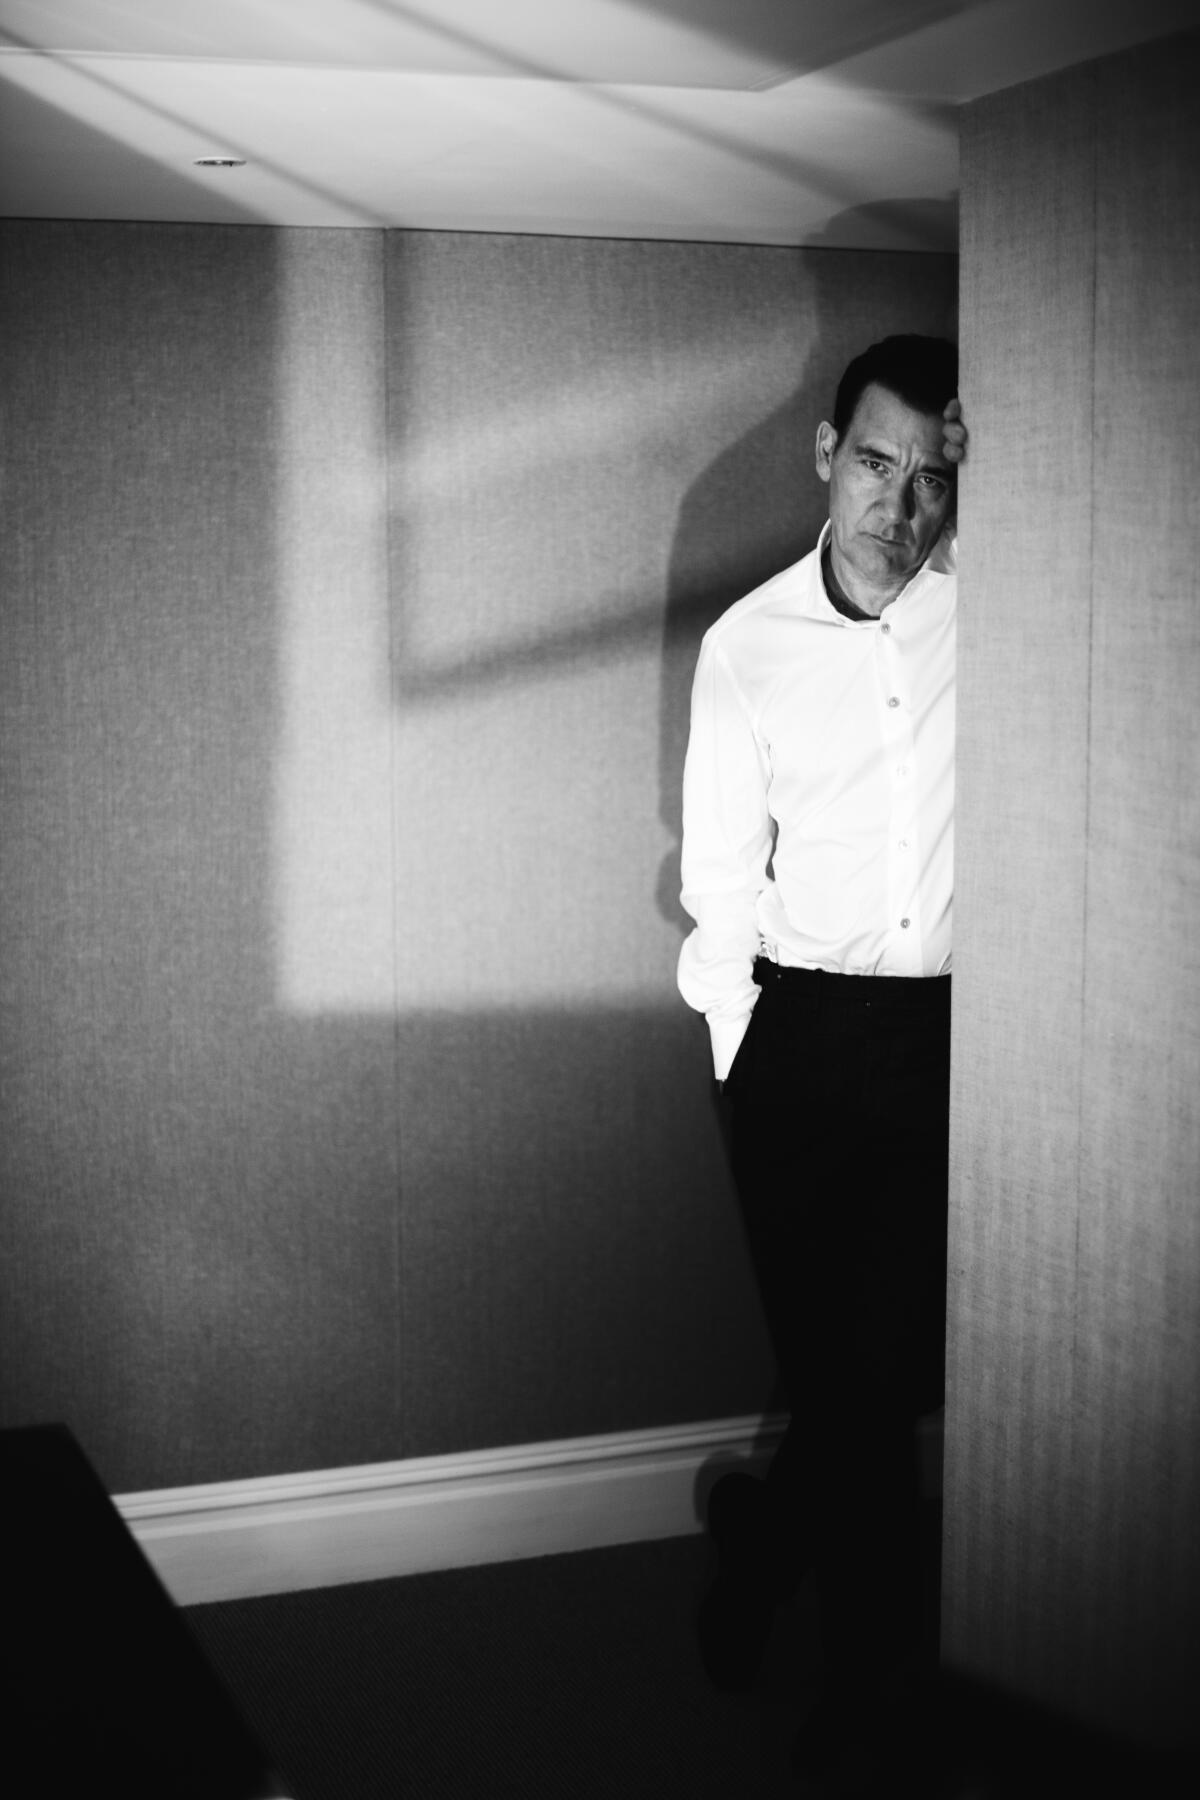 Clive Owen in a white shirt and dark pants leans his head against a door.